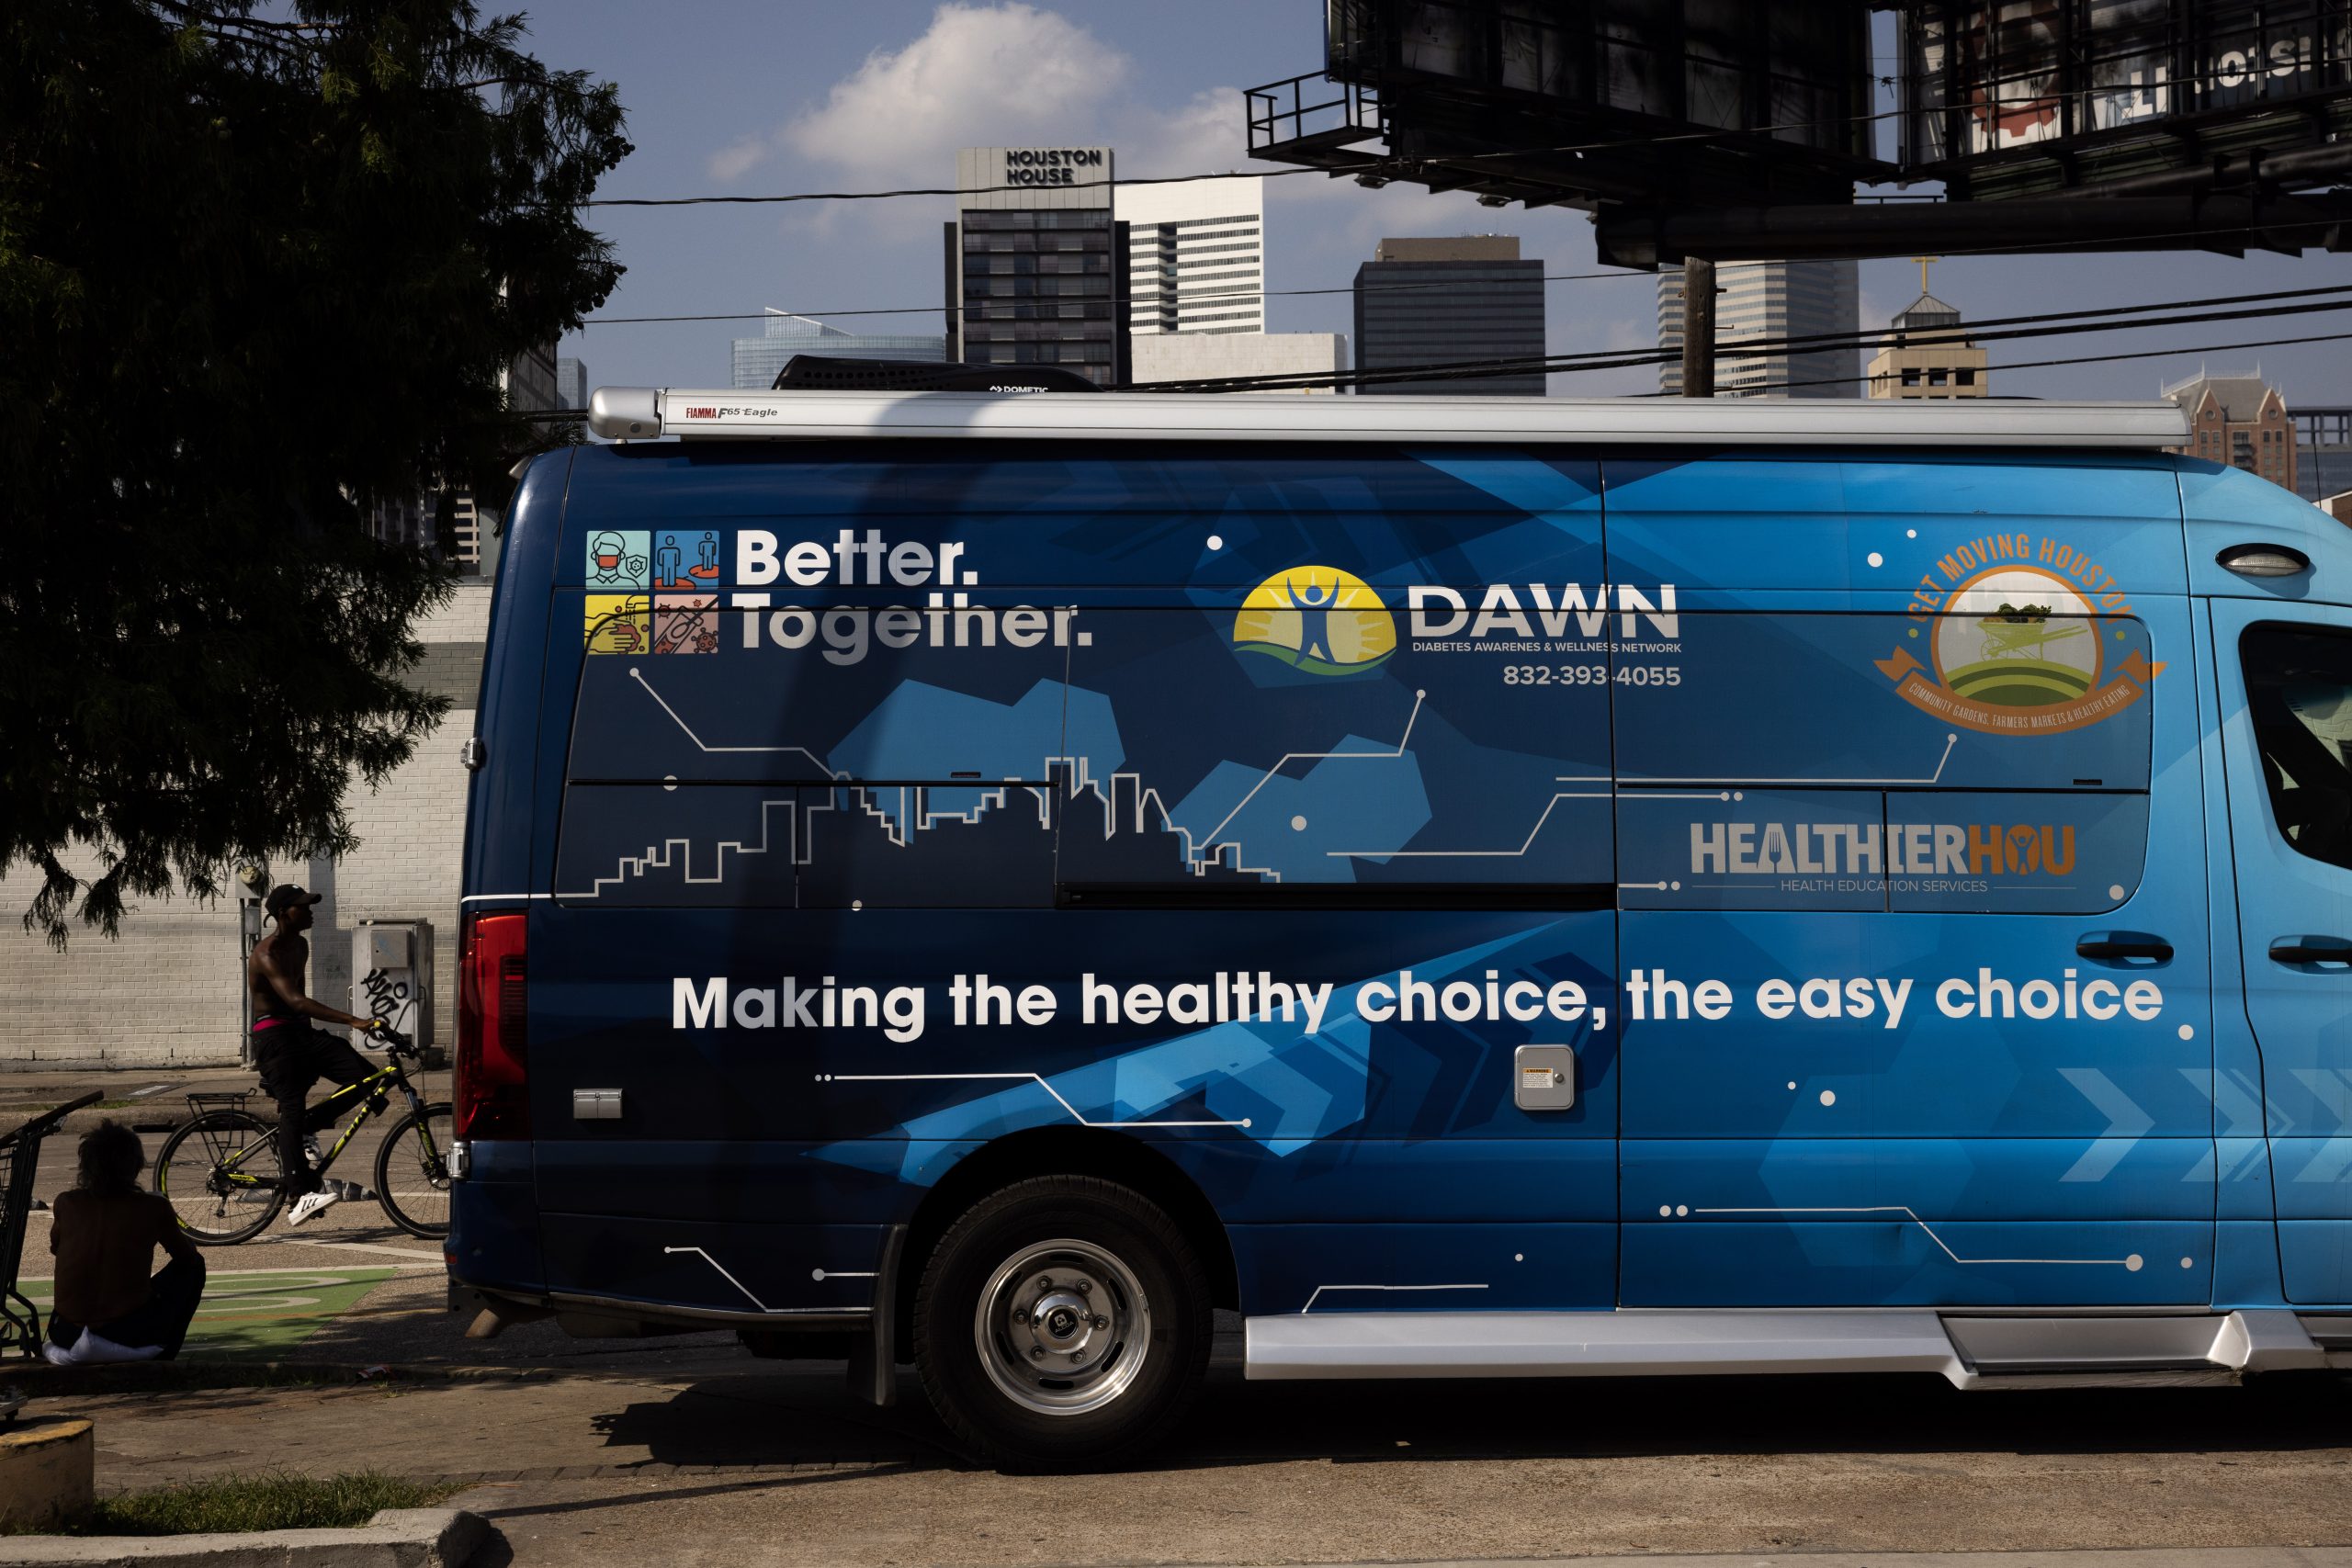 A mobile health clinic bus in Houston